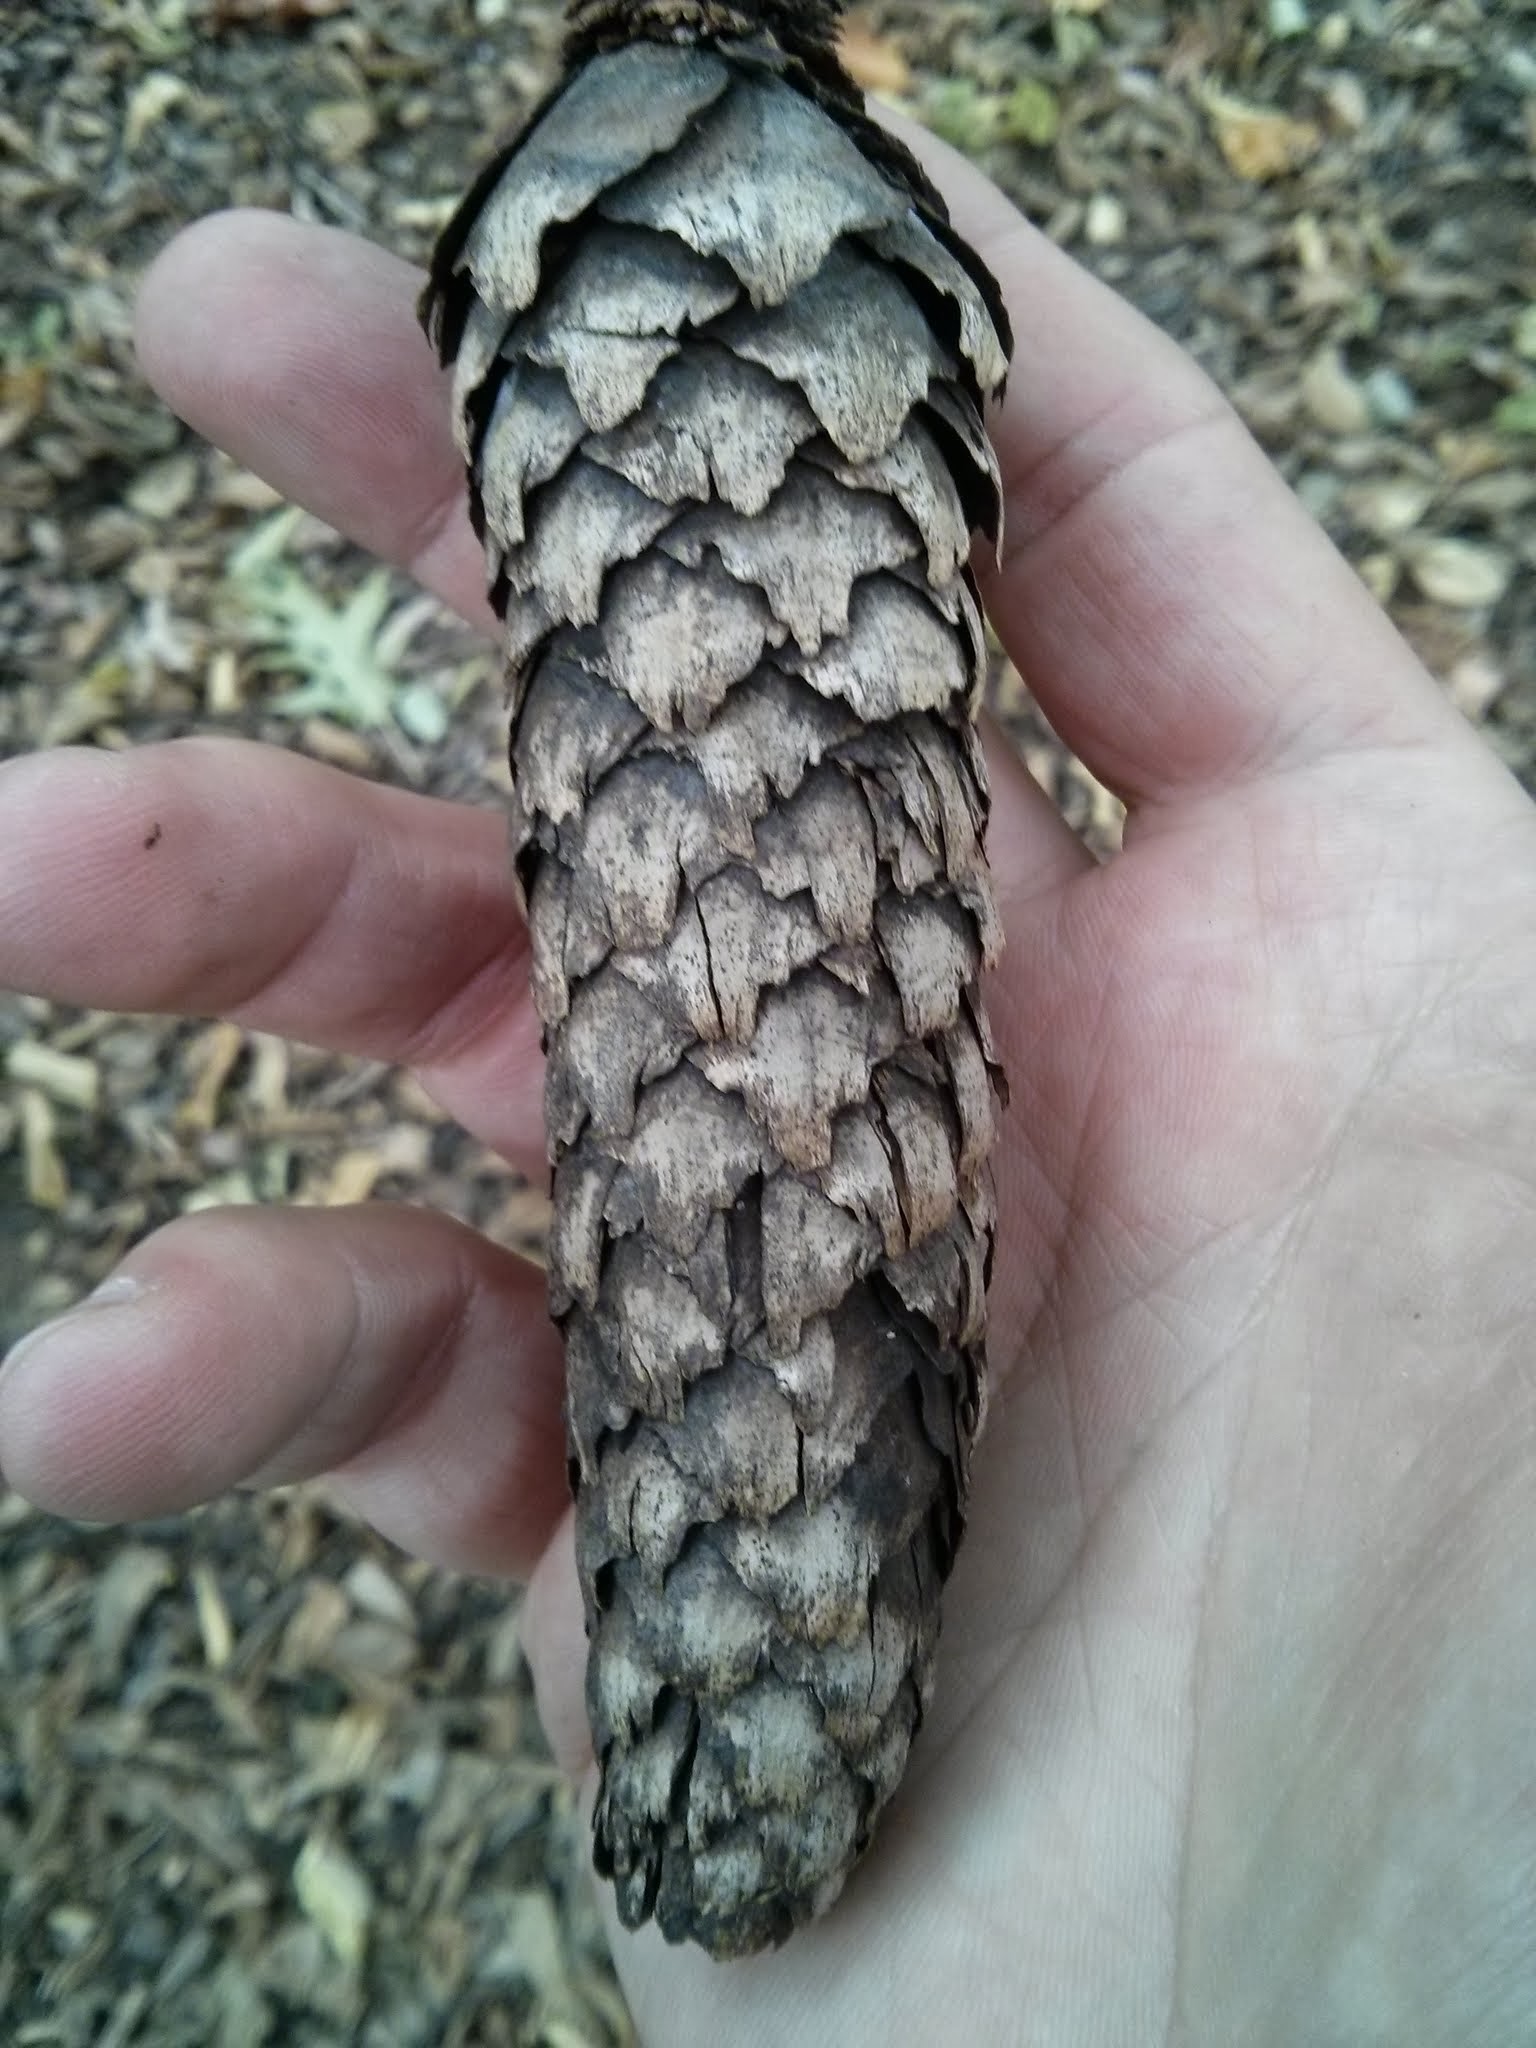 Norway spruce cone